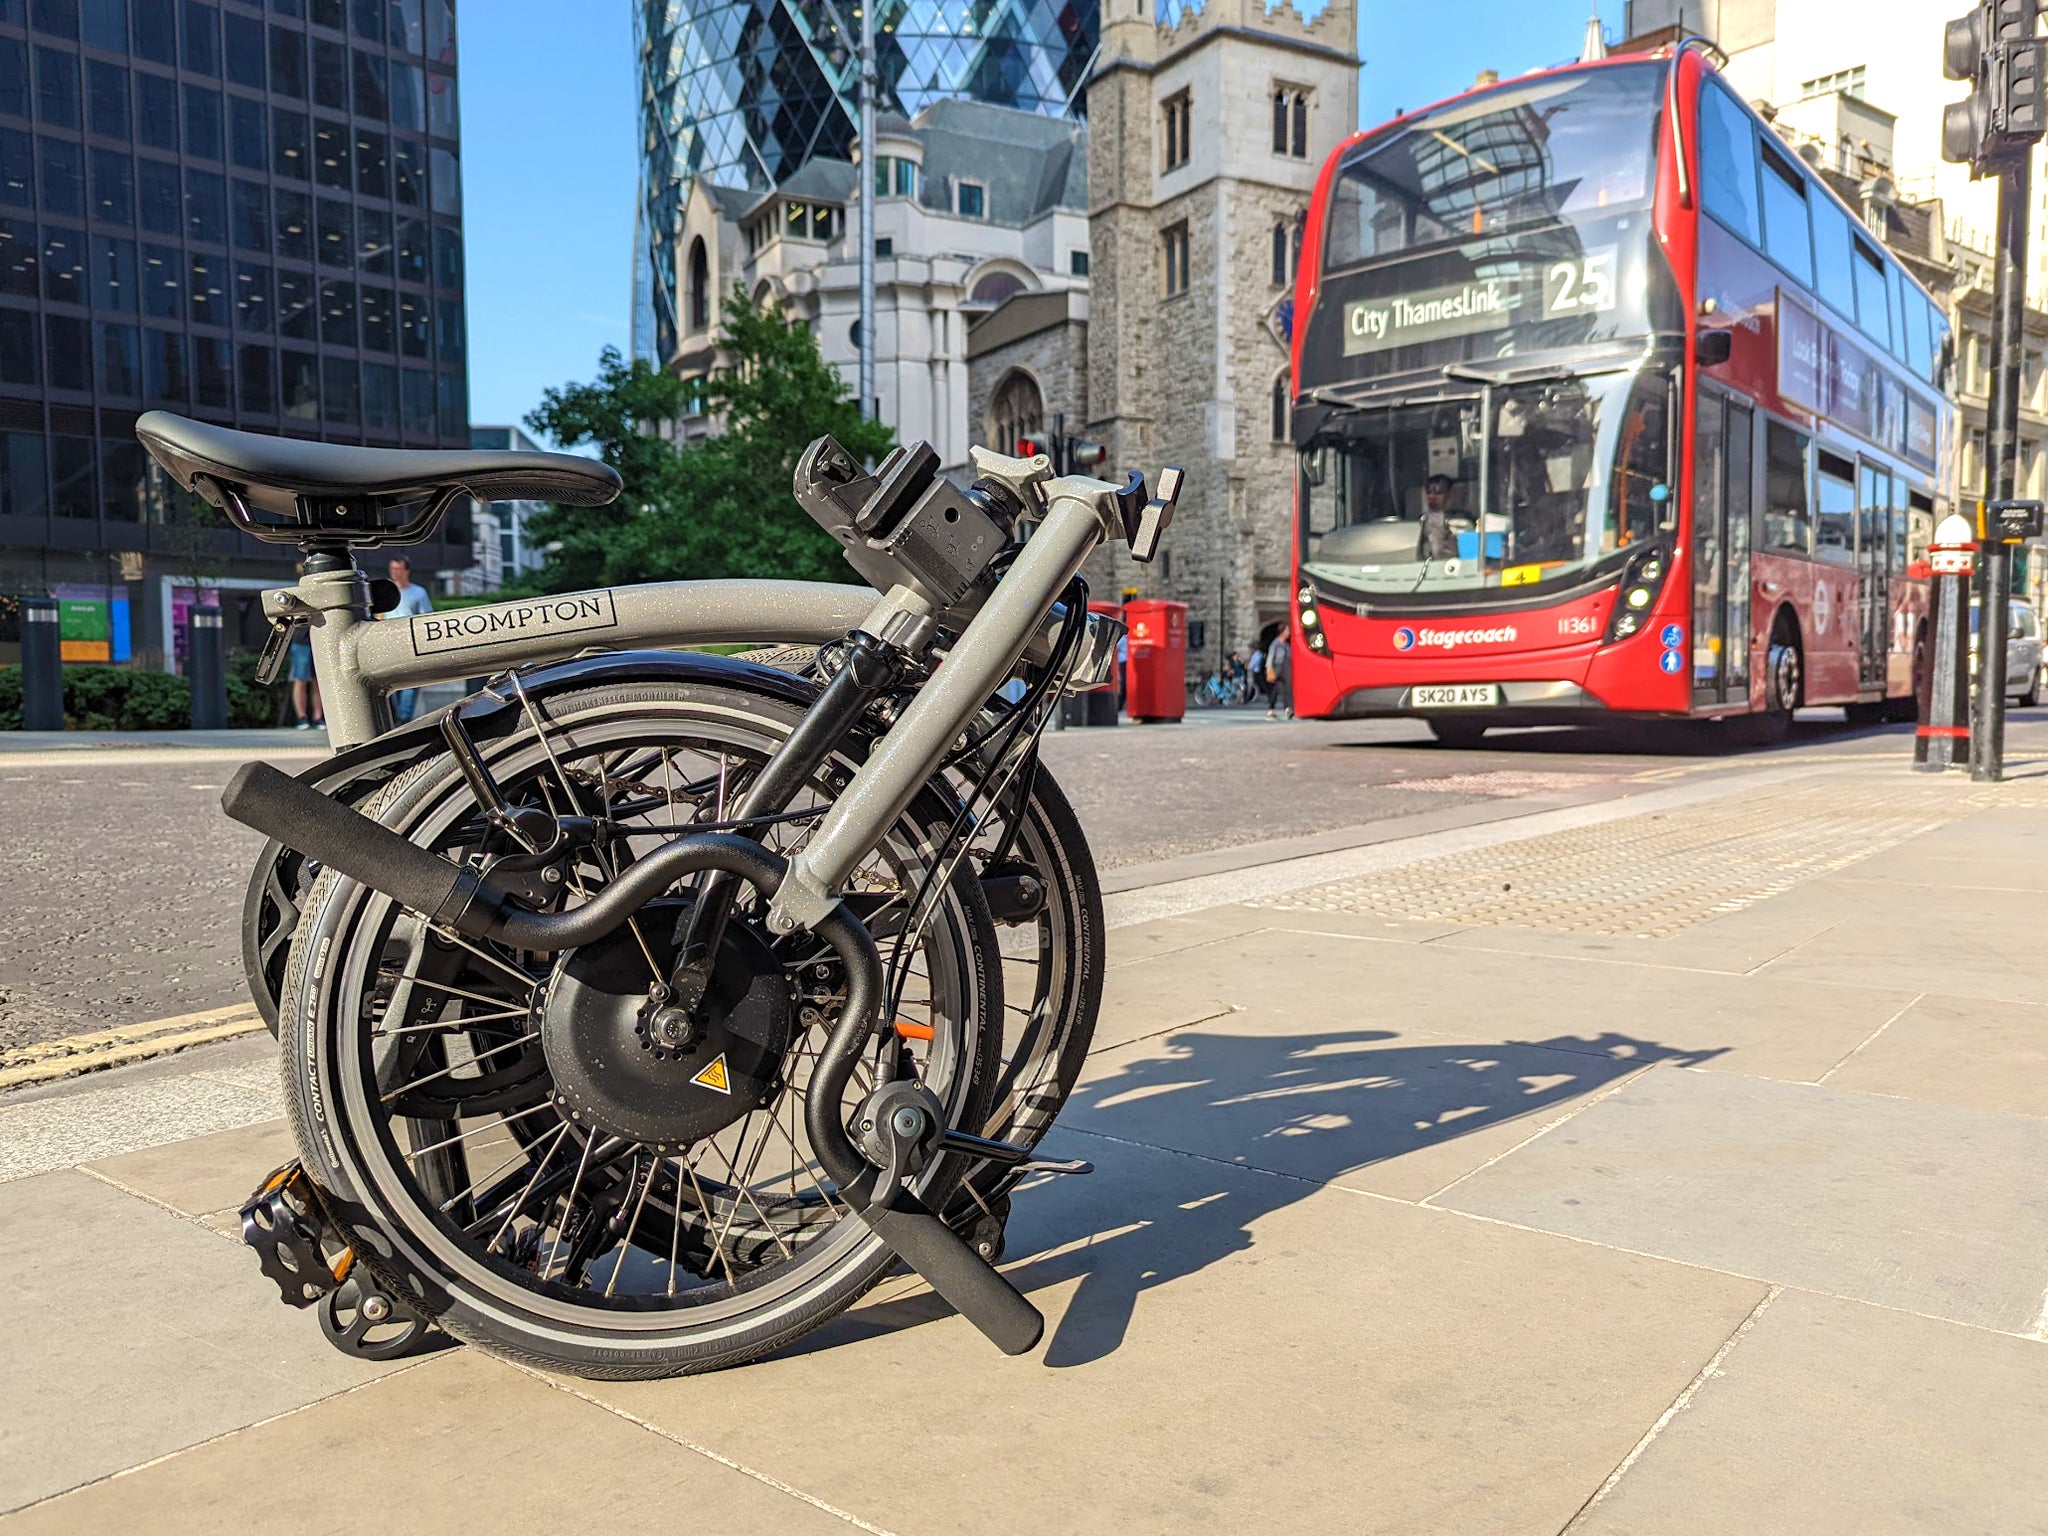 The Brompton can be folded away in under 20 seconds